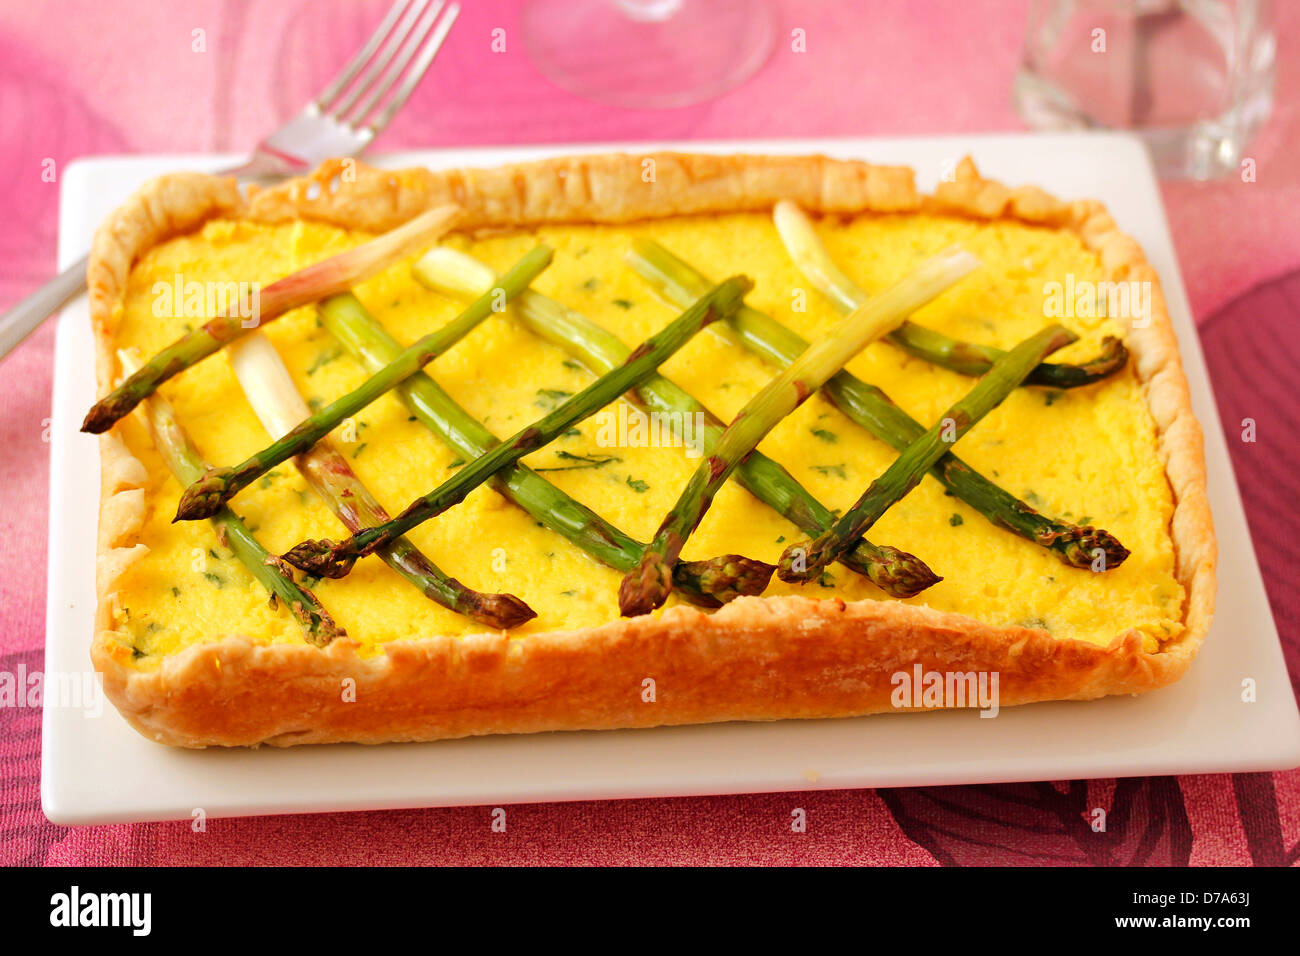 Puff pastry with cheese and asparagus. Recipe available. Stock Photo